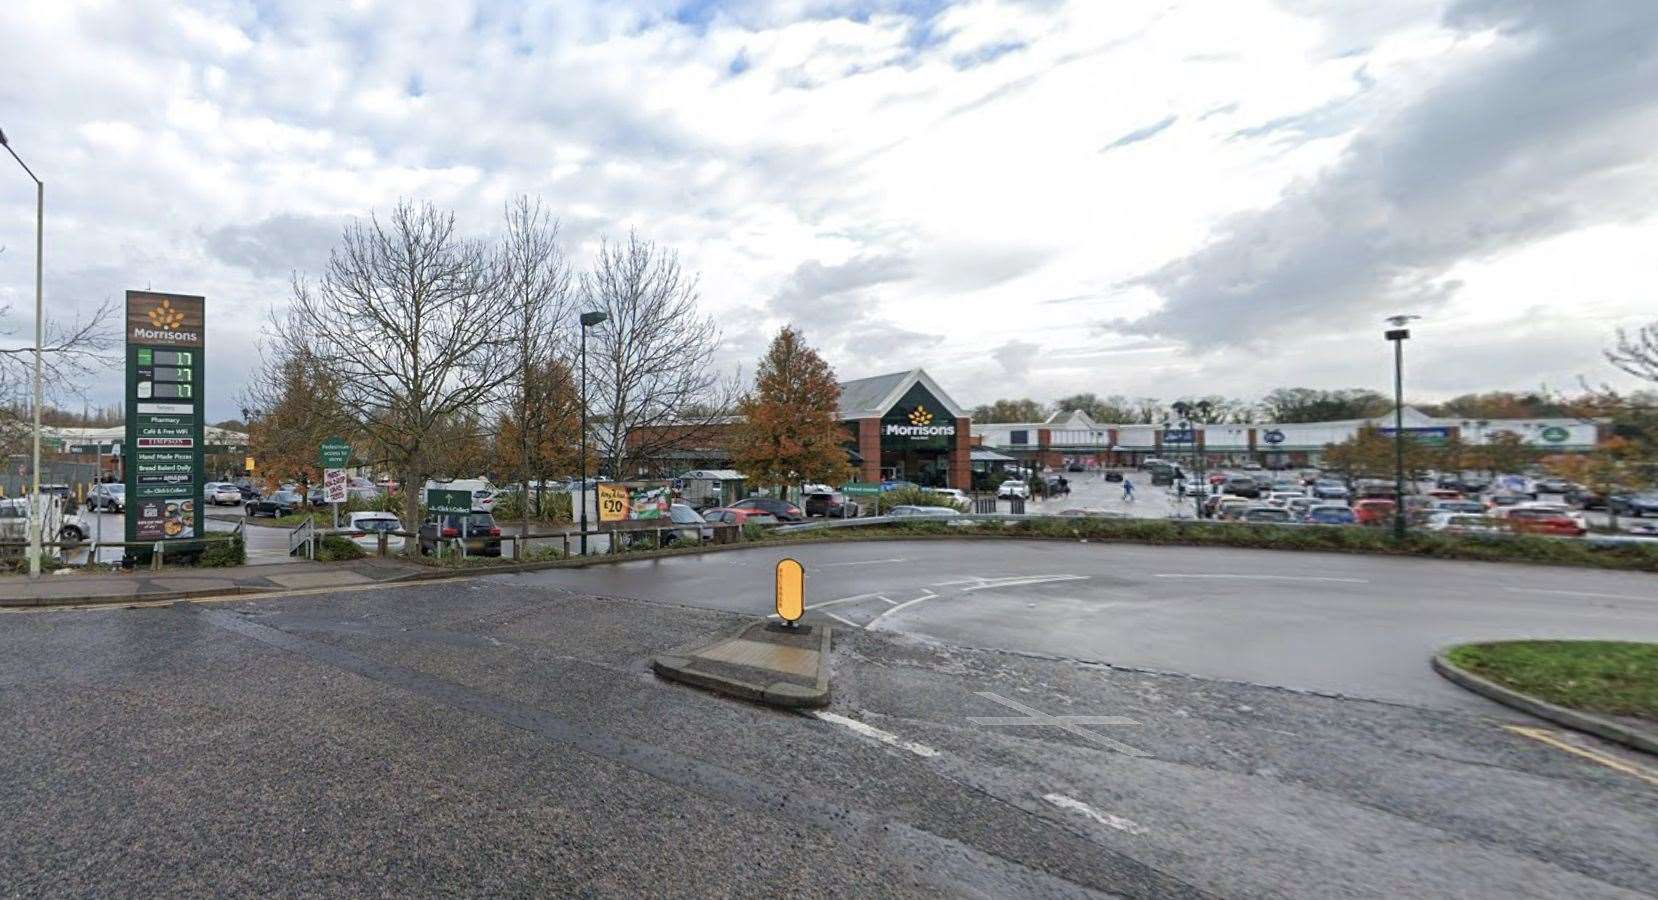 Hobbycraft will open a new store at the Riverside Retail Park in Wincheap, Canterbury. Picture: Google